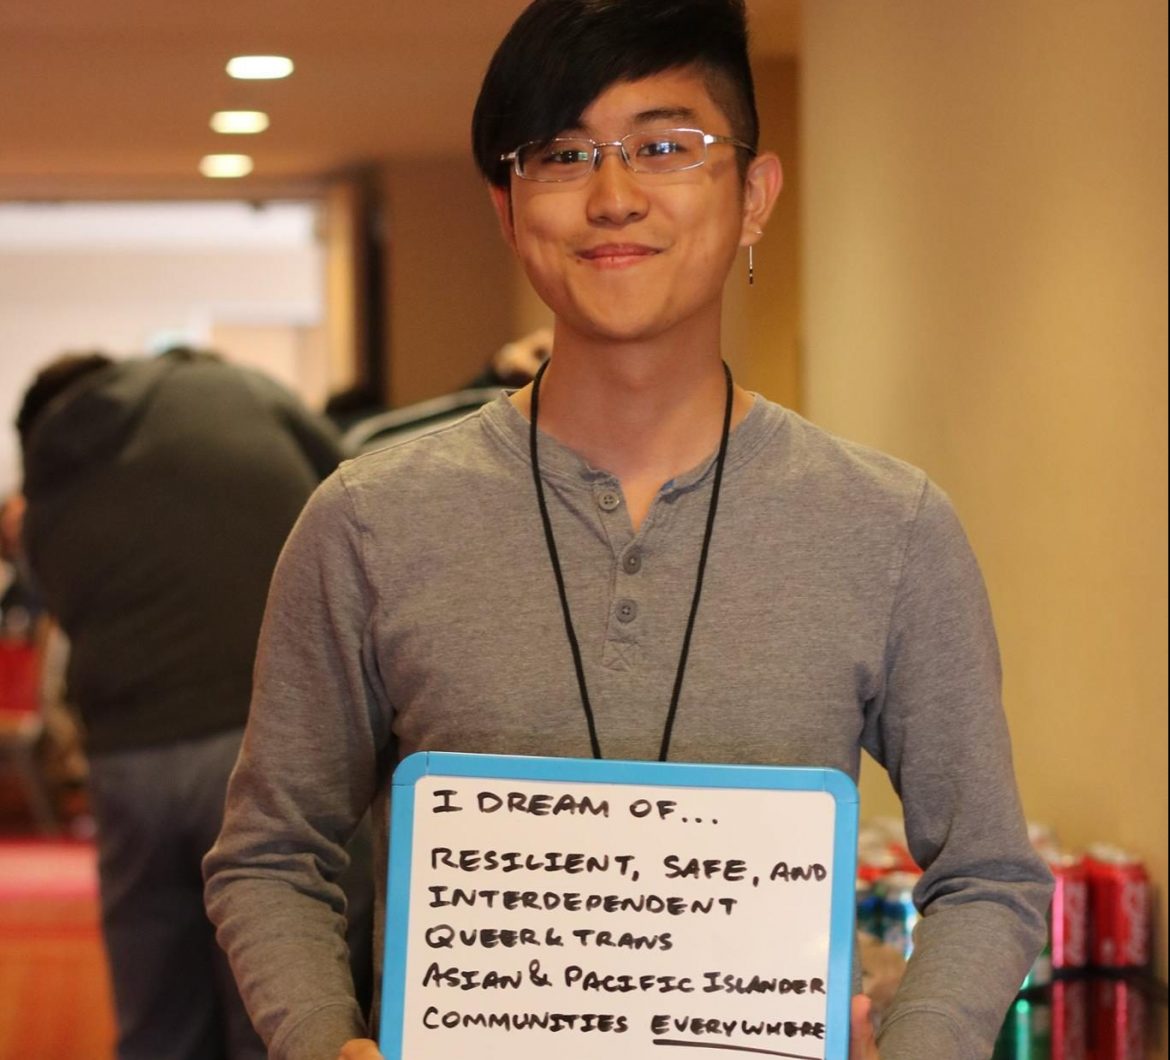 Image description: Ethan stands indoors, smiling at the camera and holding a small whiteboard that reads: "I dream of resilient, safe, and interdependent queer & trans Asian & Pacific Islander communities everywhere."